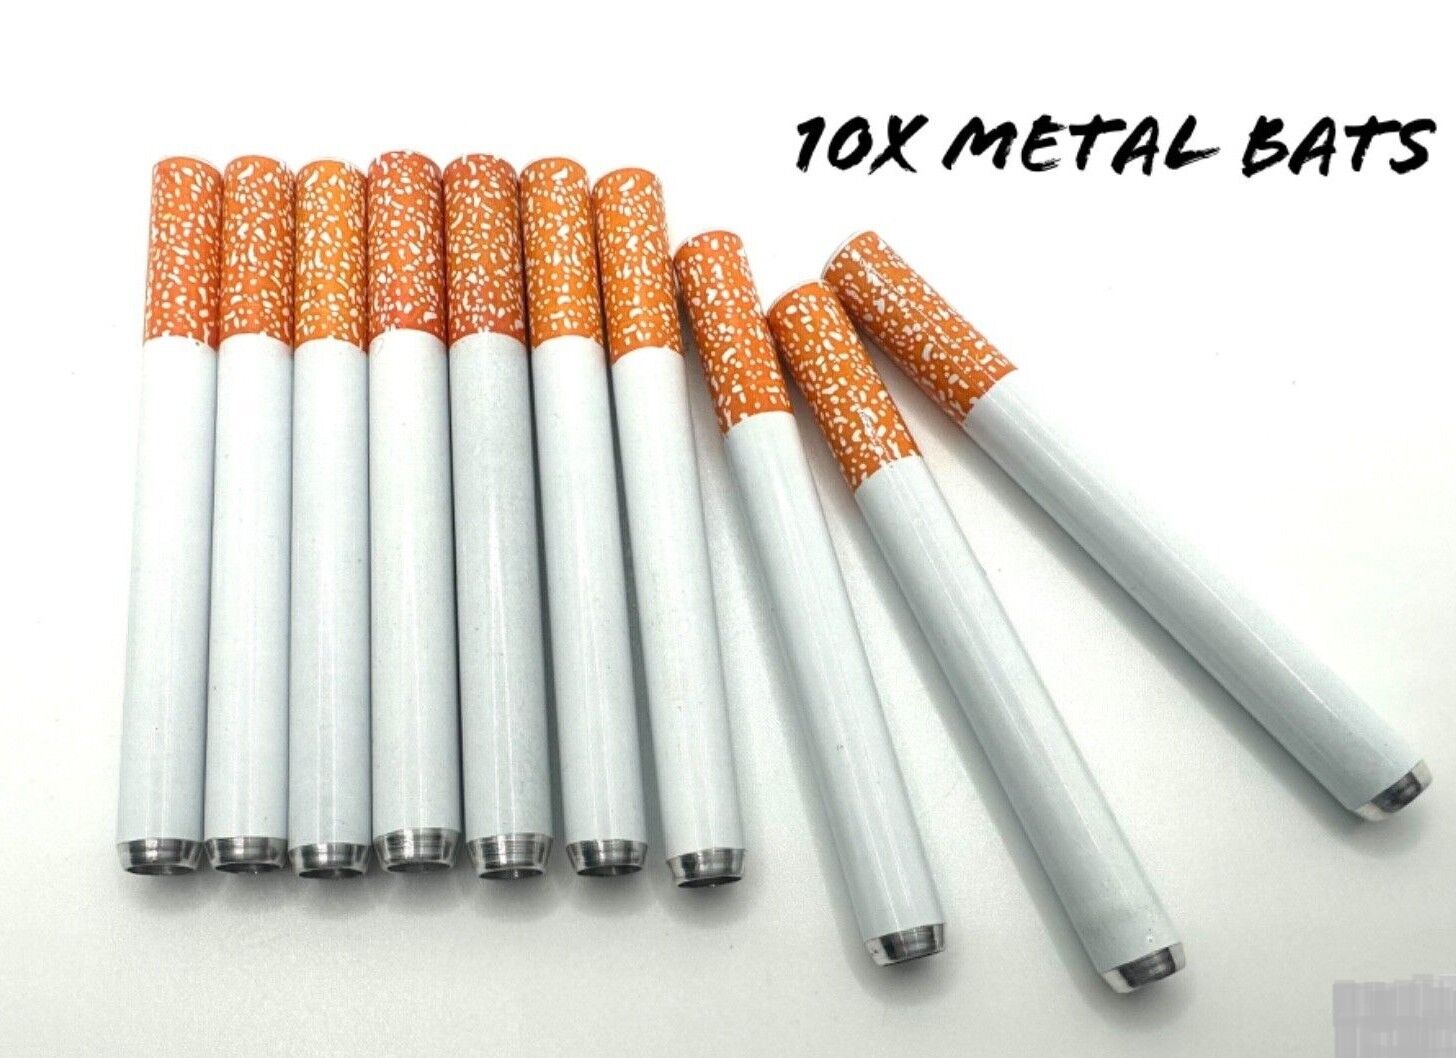 Pack of 10 Metal One Hitter Dugout Pipe Cigarette Sticks Large 10 Tobacco-